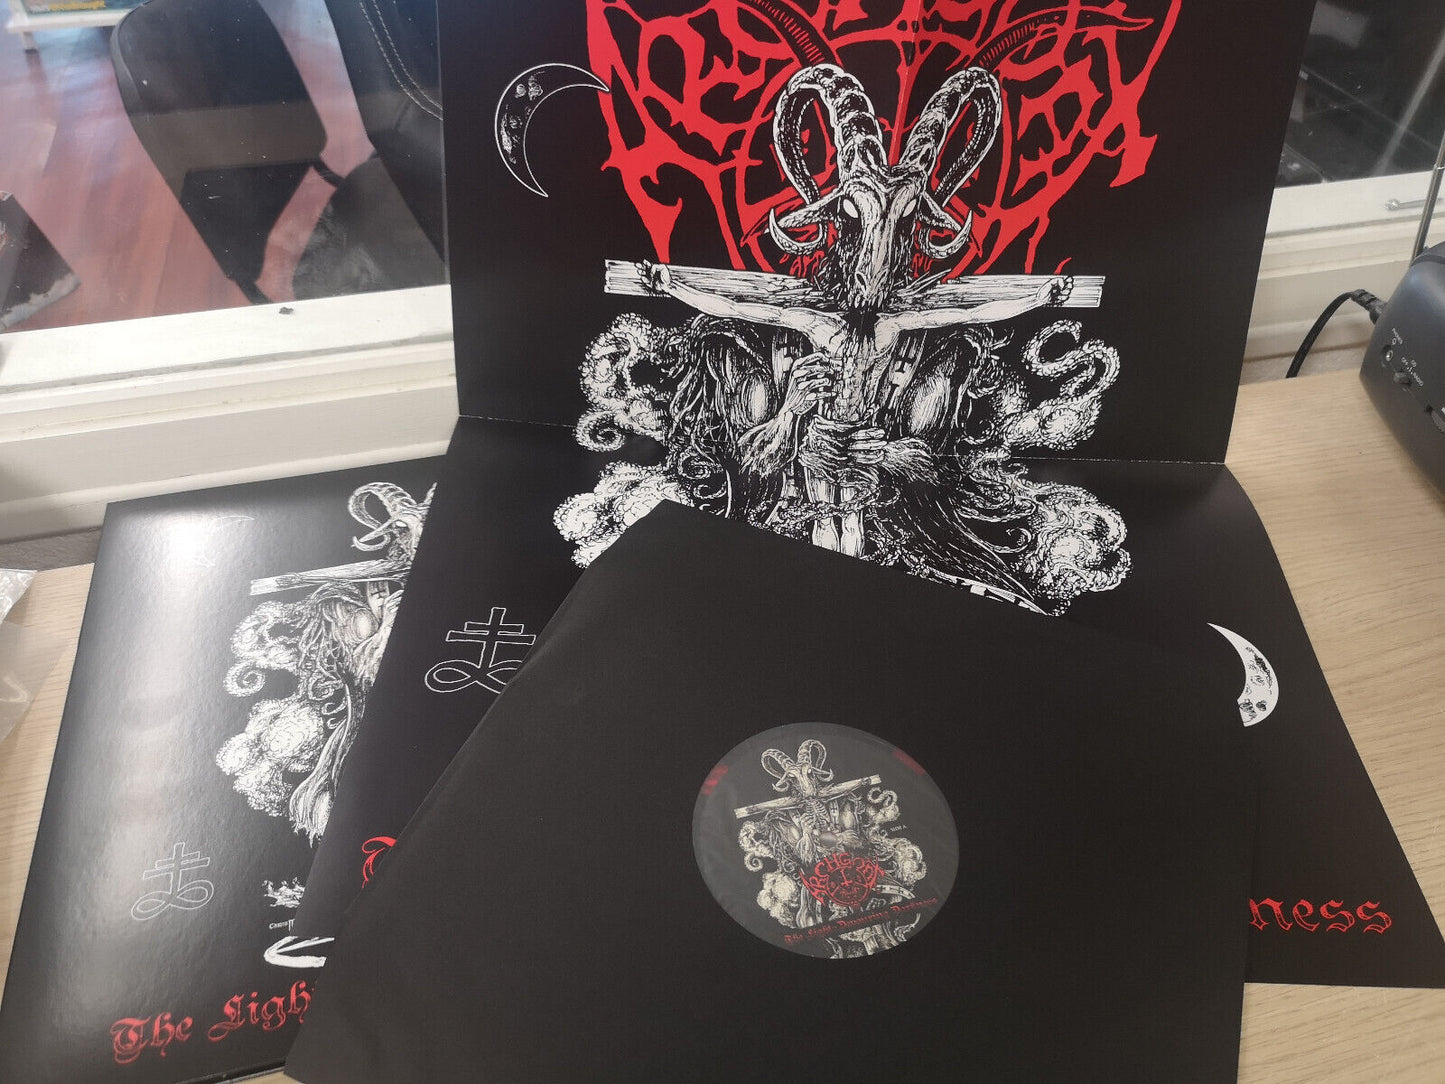 Archgoat "The Light-Devouring Darkness" NEW Re Red/Black Vinyl w/ Booklet